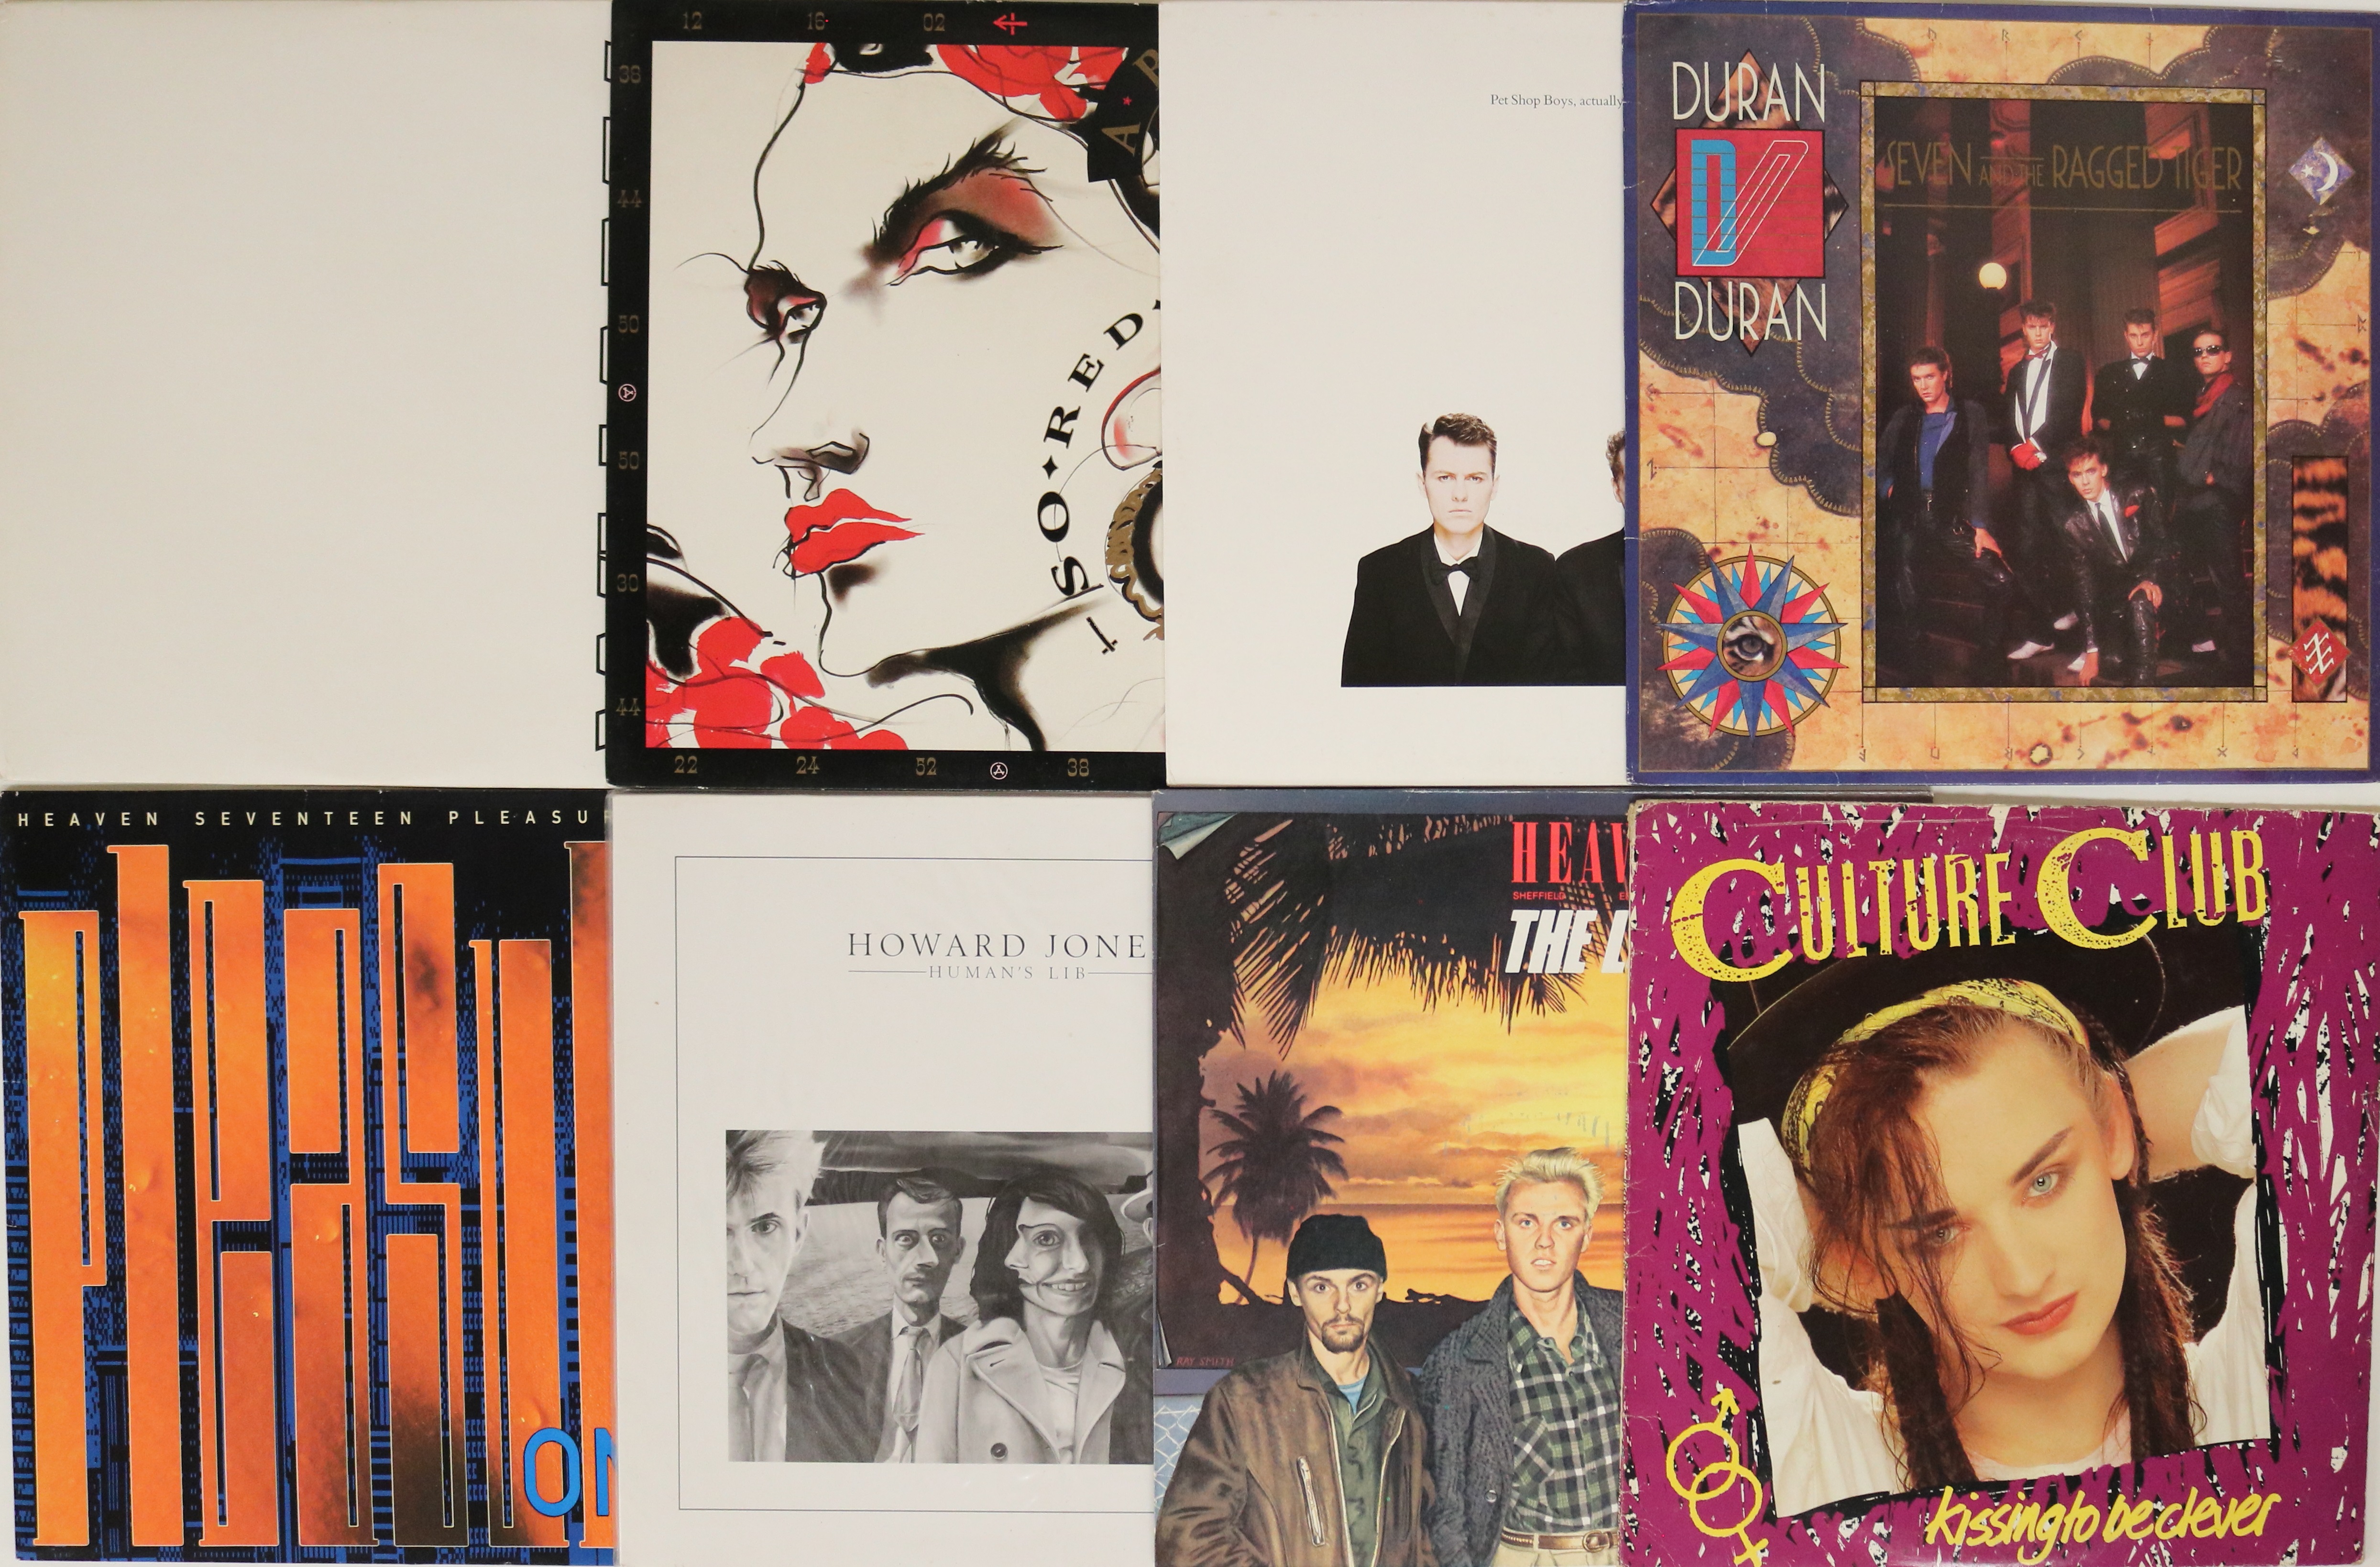 NEW WAVE / ART ROCK / COOL POP - LPs/12". Smashing collection of 54 x LPs and 30 x 12". - Image 3 of 5